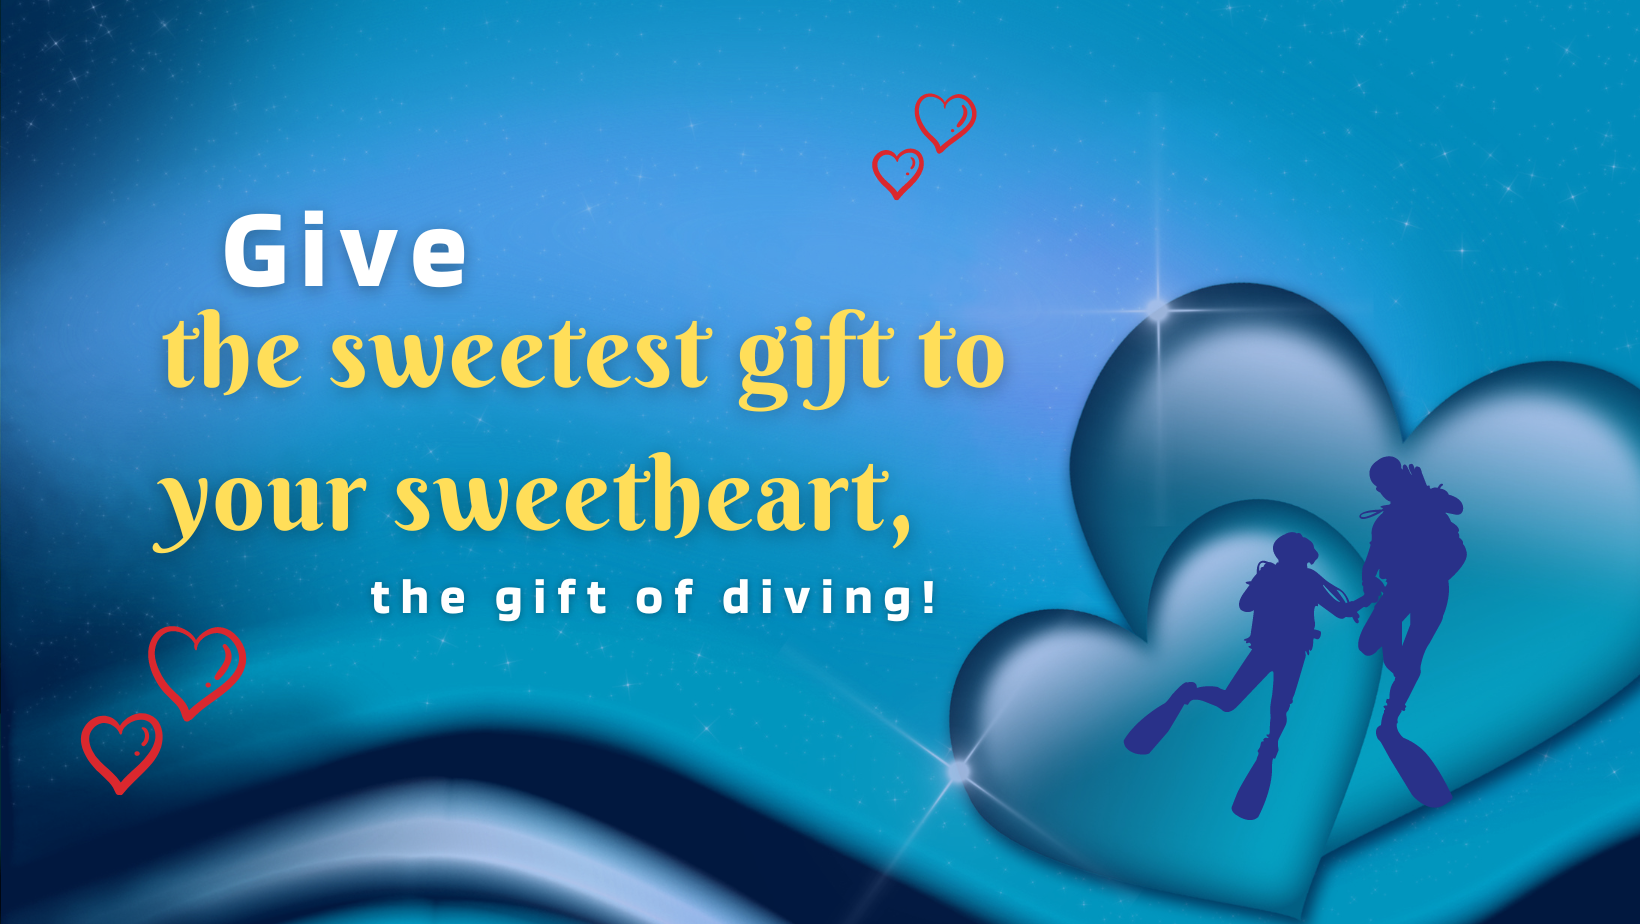 There’s Never A Better Time To Give The Sweetest Gift To Your Sweetheart This February, The Gift Of Diving!